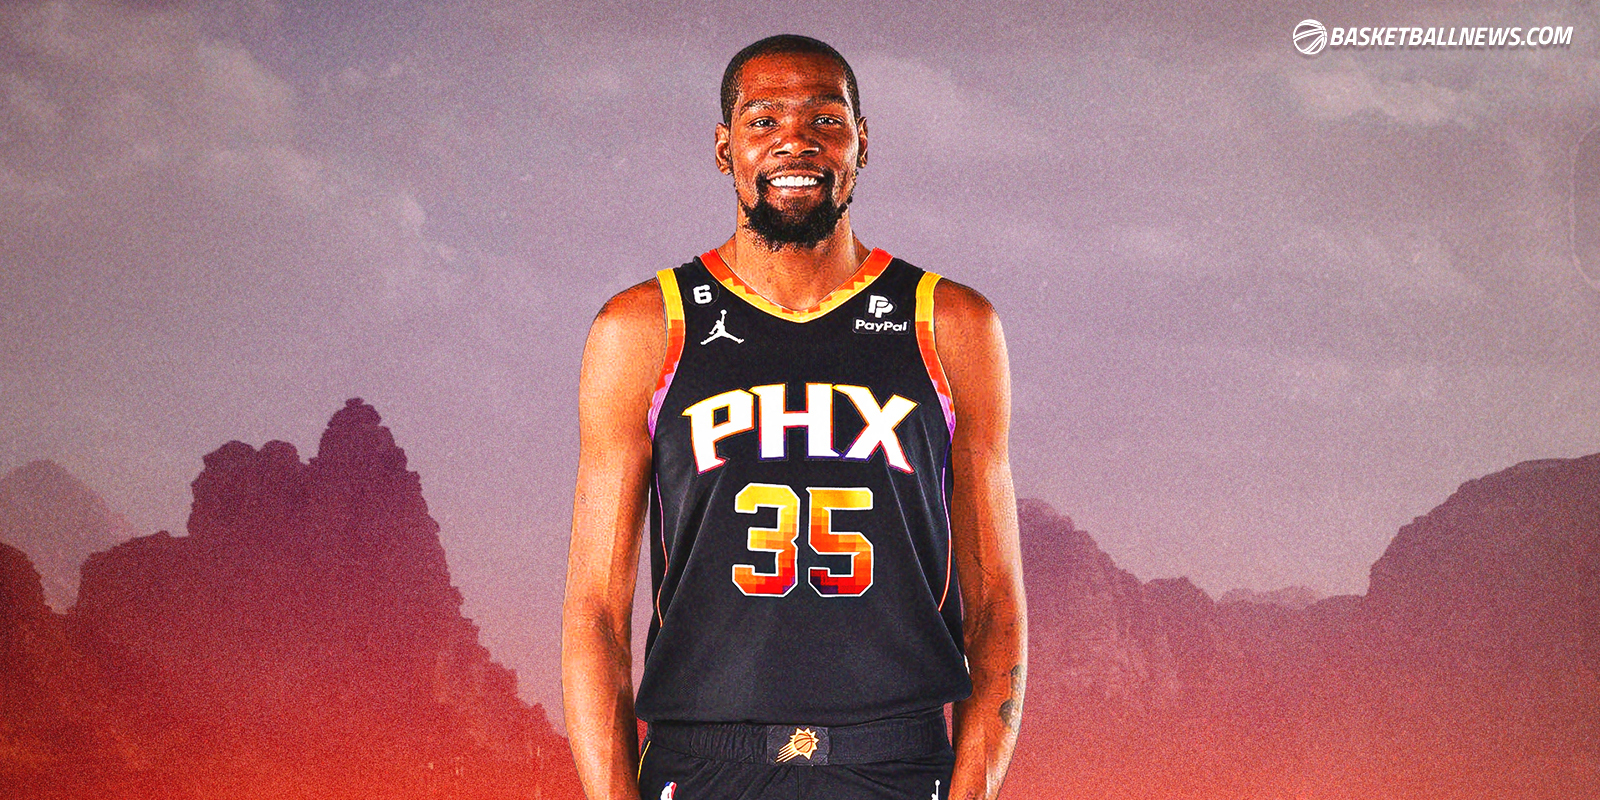 ESPN on X: Breaking: The Phoenix Suns are nearing a blockbuster trade to  acquire Kevin Durant, sources tell @wojespn. The Suns are sending Mikal  Bridges, Cam Johnson, Jae Crowder, four firt-round picks